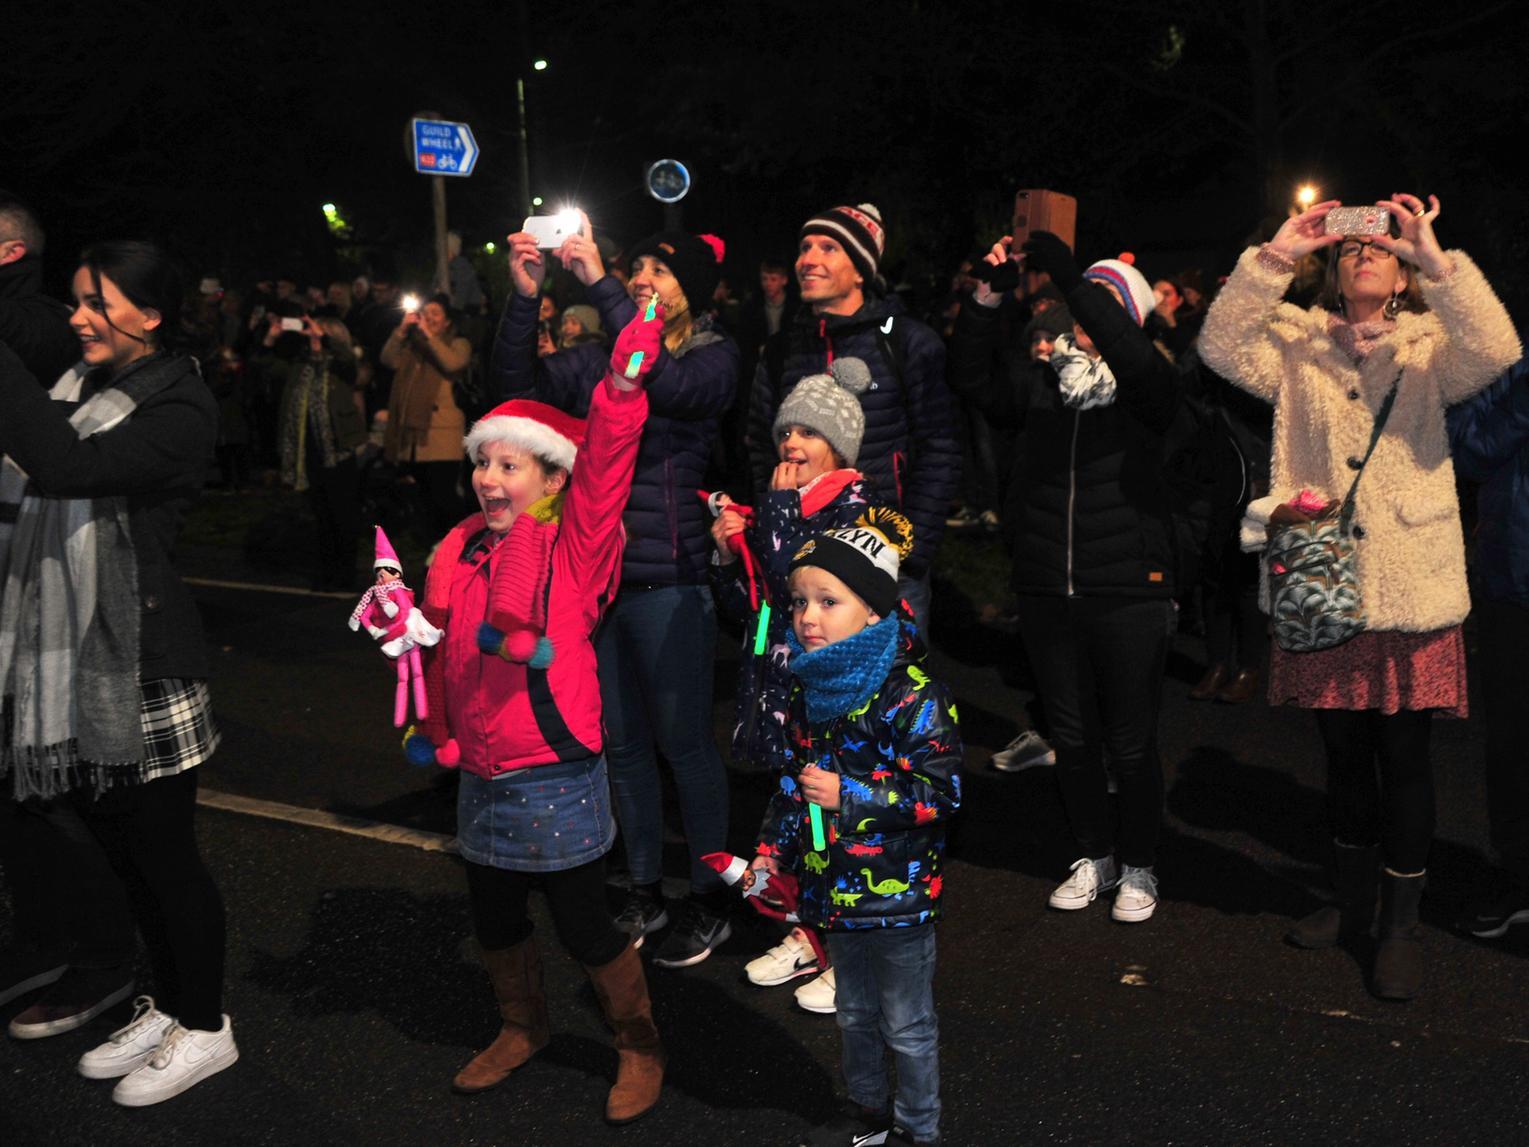 The switch-on was a crowd pleaser